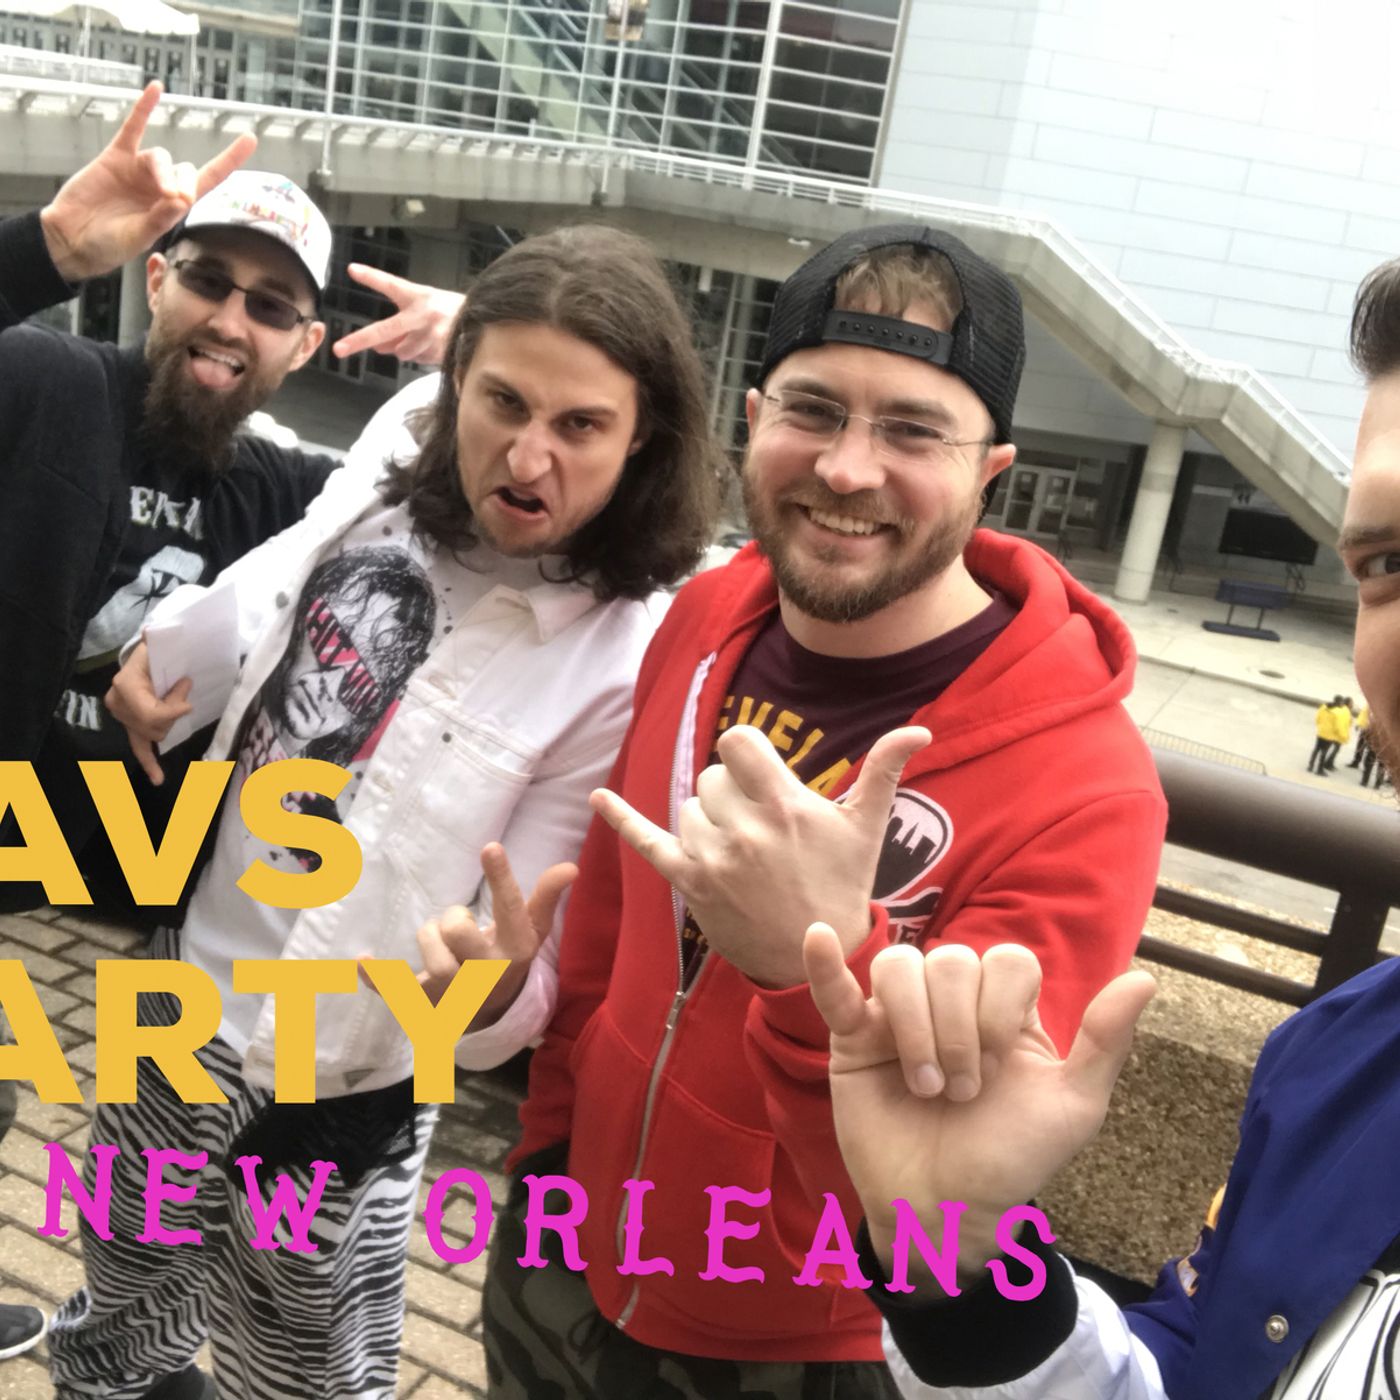 S4 Ep10: Chris Clem’s Cavs Cast #122 - Cavs party in New Orleans with Stev Guy, Matt Kane, and Tim